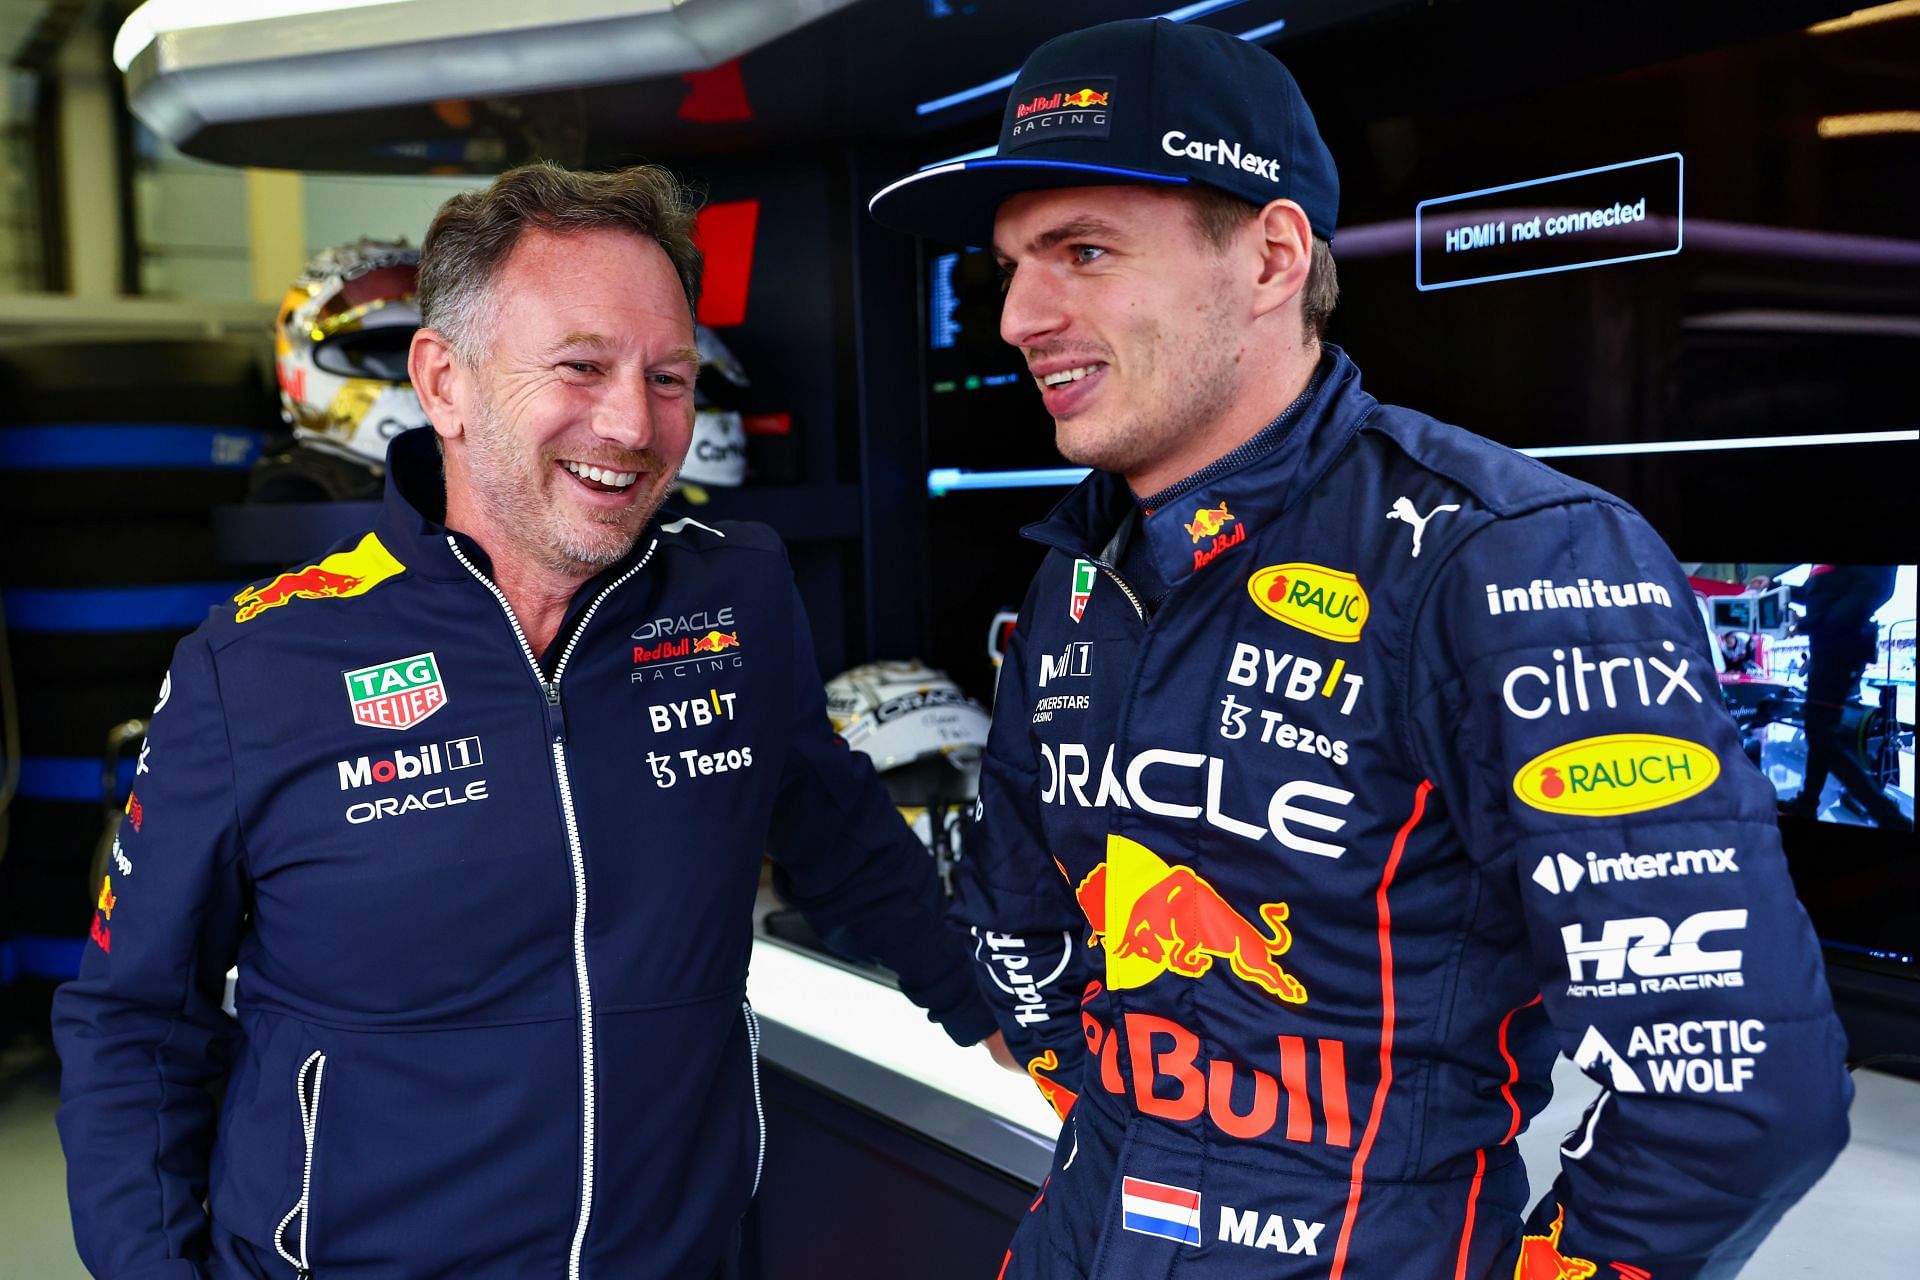 Here's 'the only thing that's really changed' about Max Verstappen ...